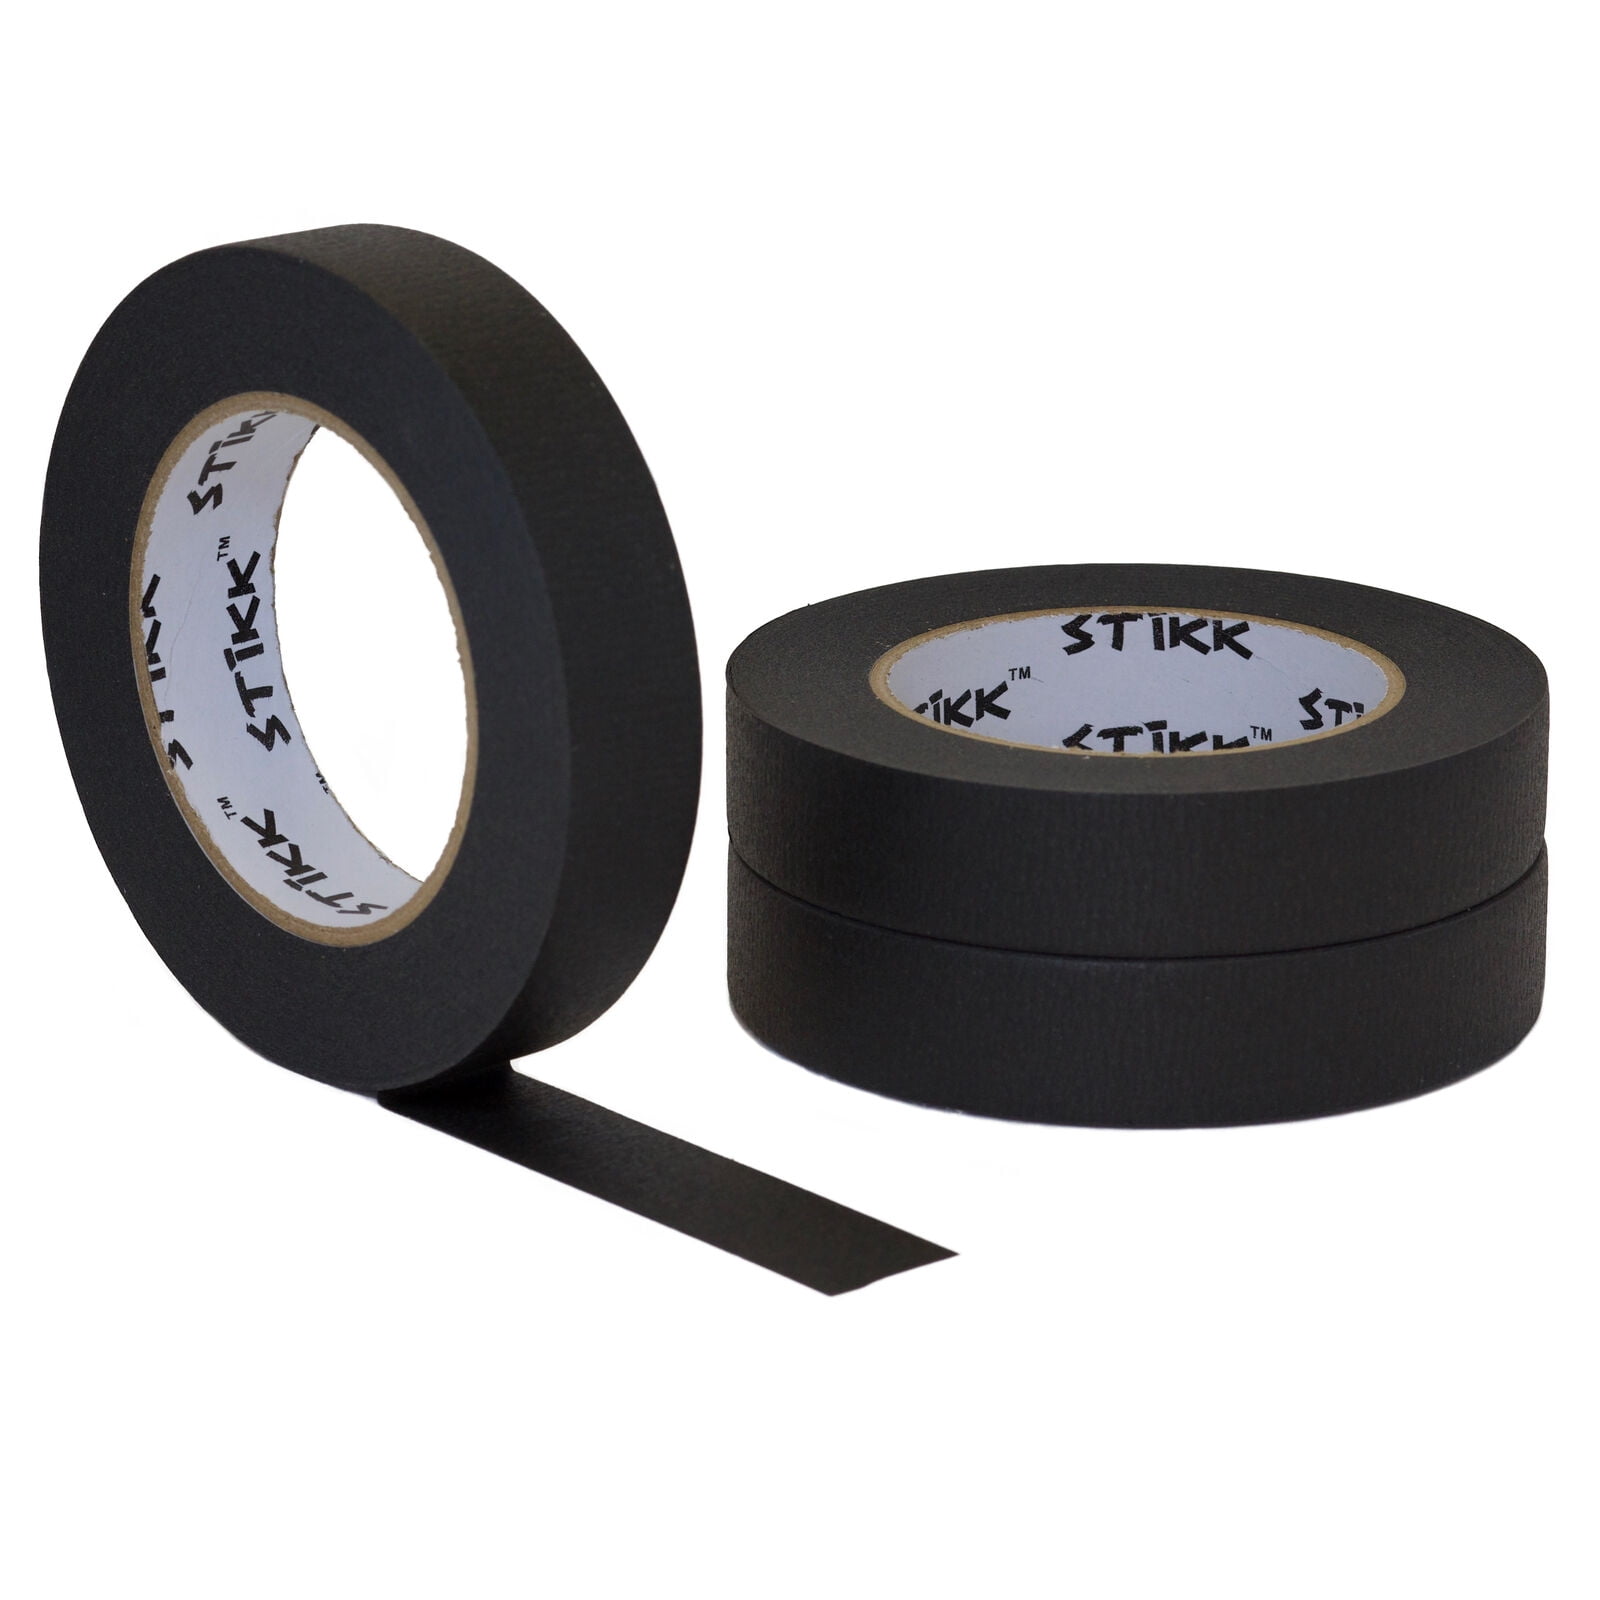 3 pk 1 inch x 60yd STIKK Black Painters Tape 14 Day Easy Removal Trim Edge  Finishing Decorative Marking Masking Tape (.94 in 24MM)